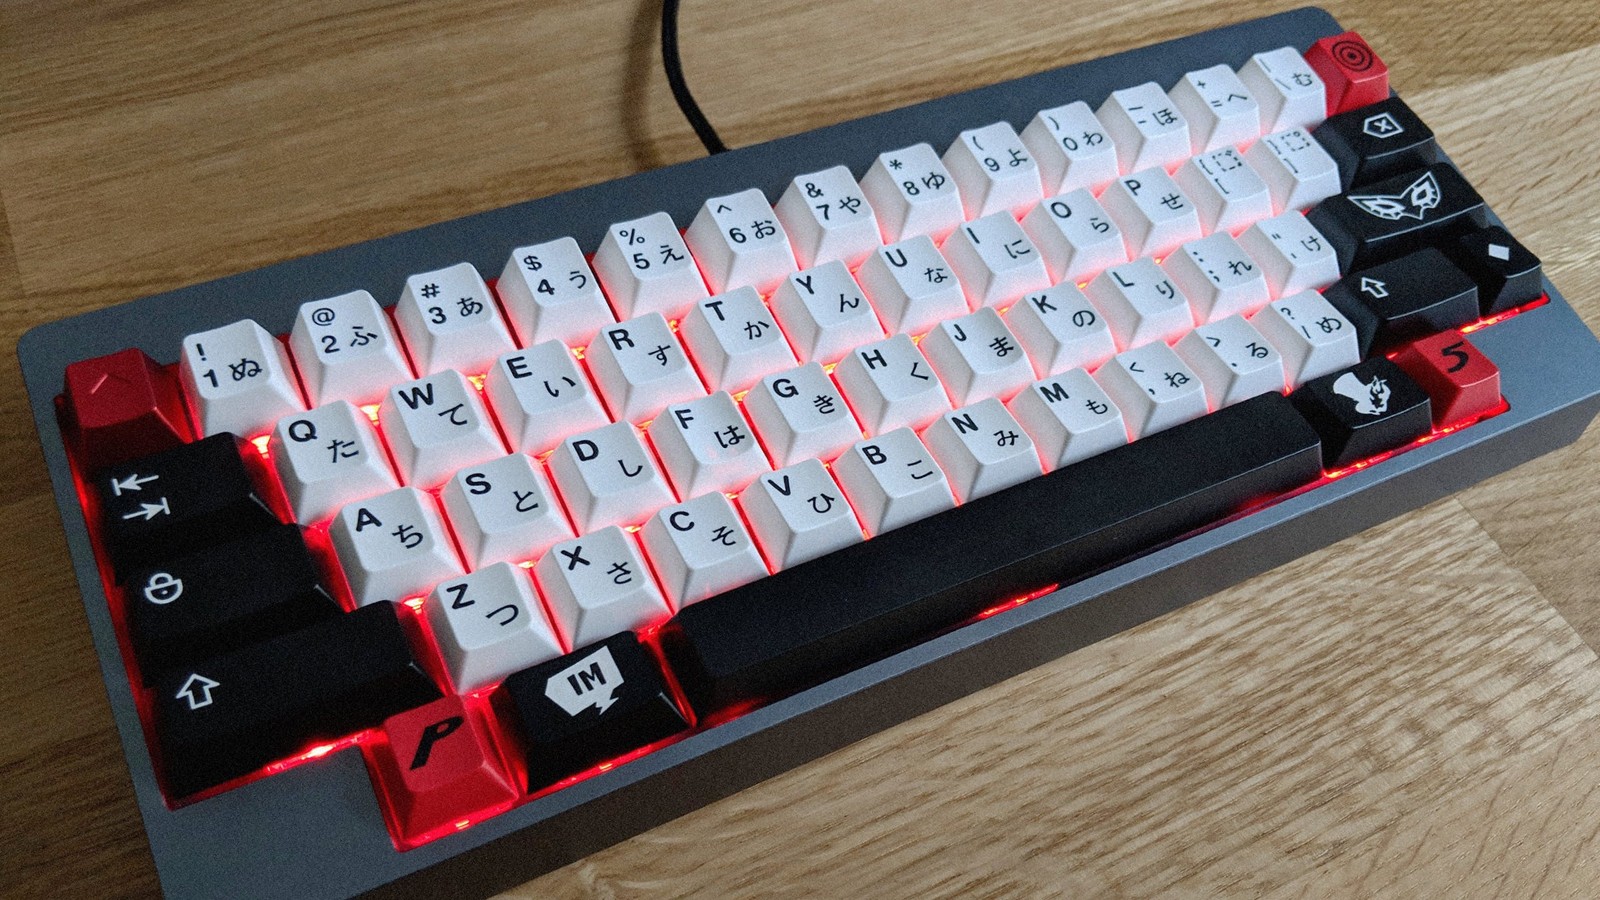 GMK Metaverse, ron RAMA m60-a with red LEDs turned on wooden desk